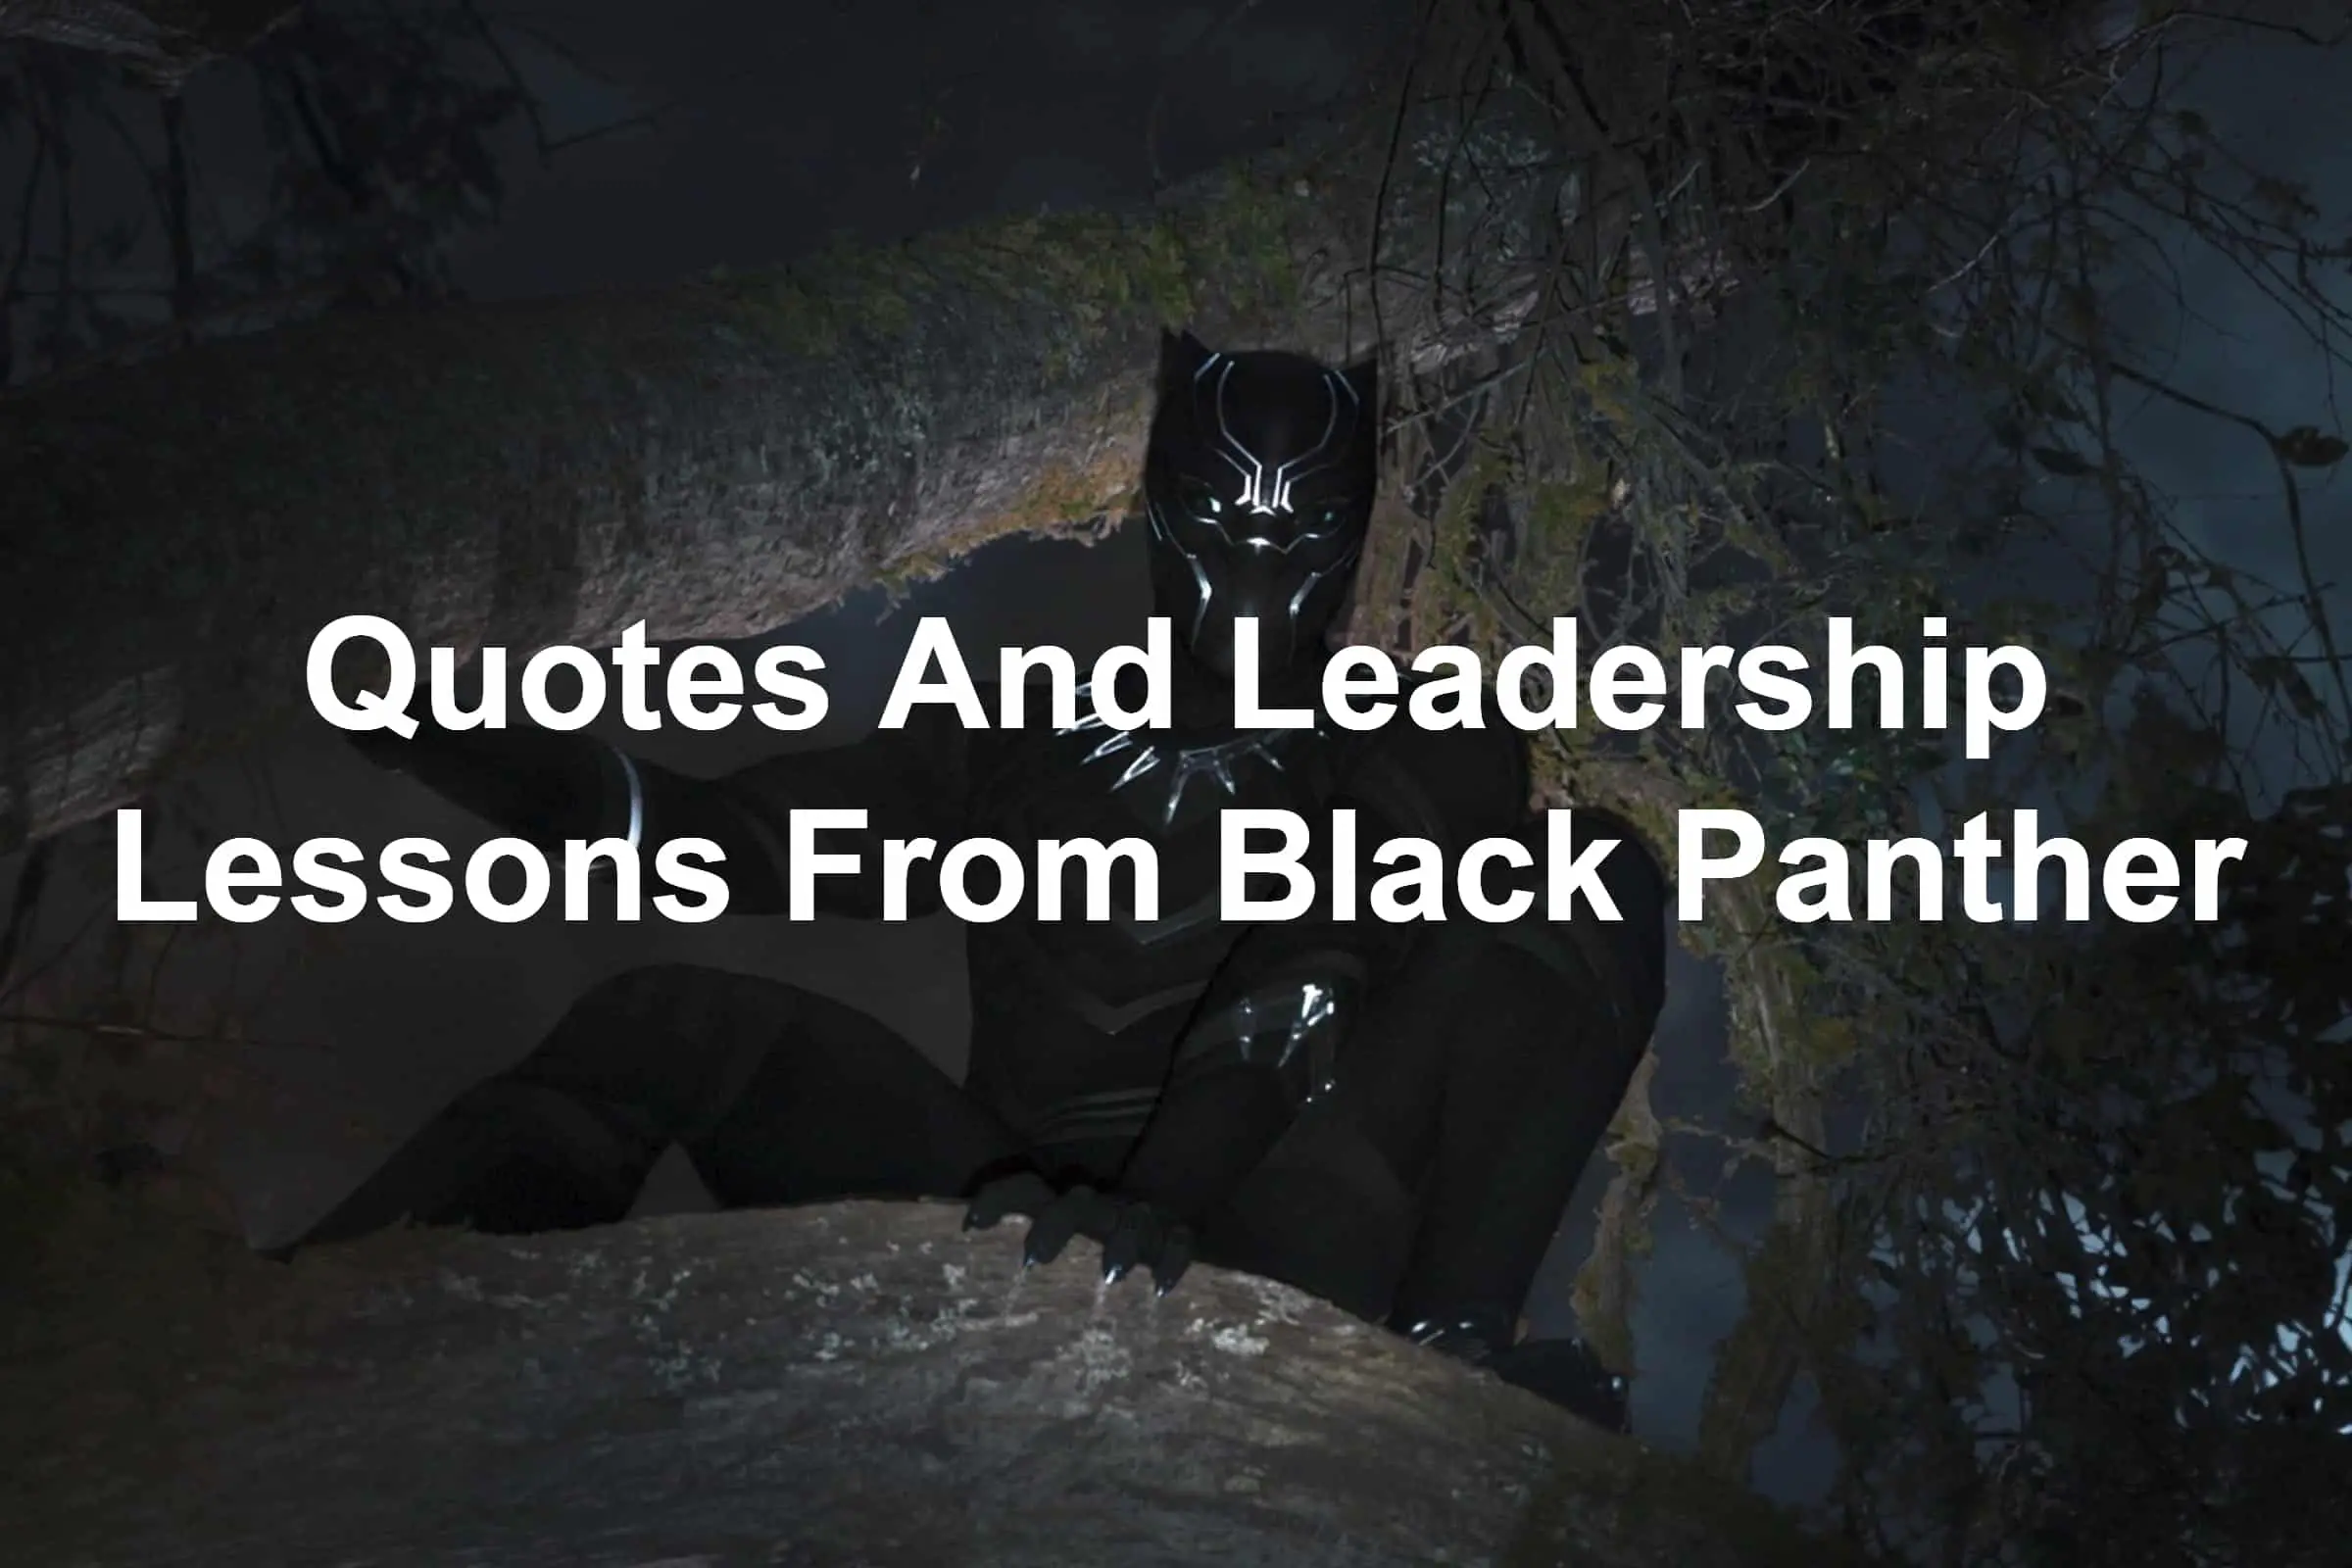 Black Panther Quotes And Leadership lessons